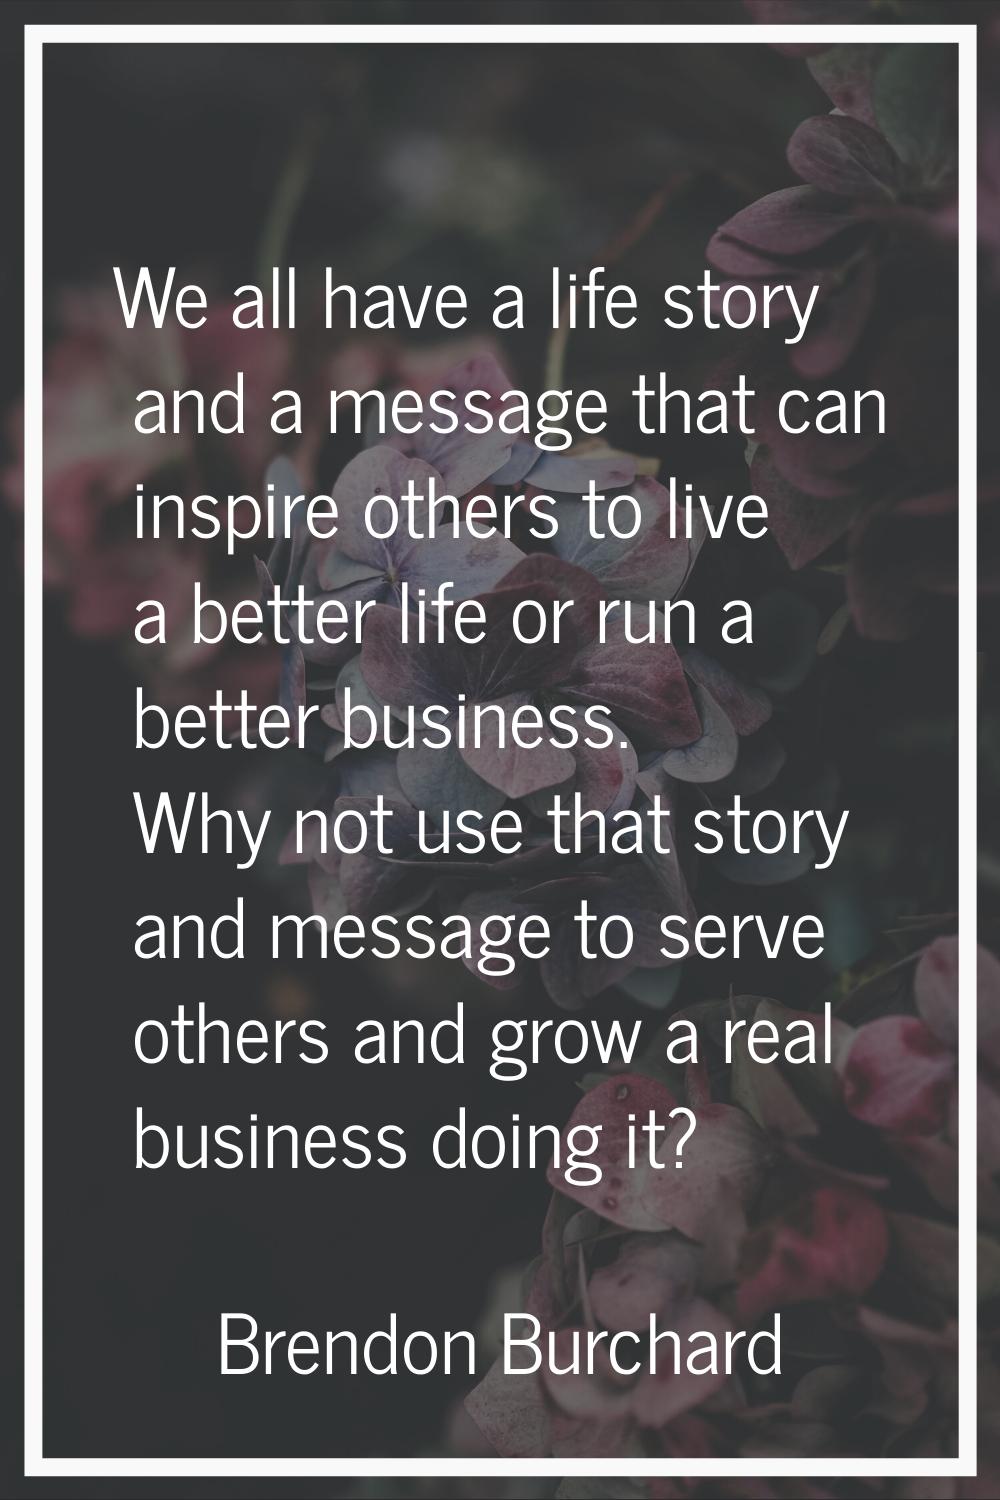 We all have a life story and a message that can inspire others to live a better life or run a bette